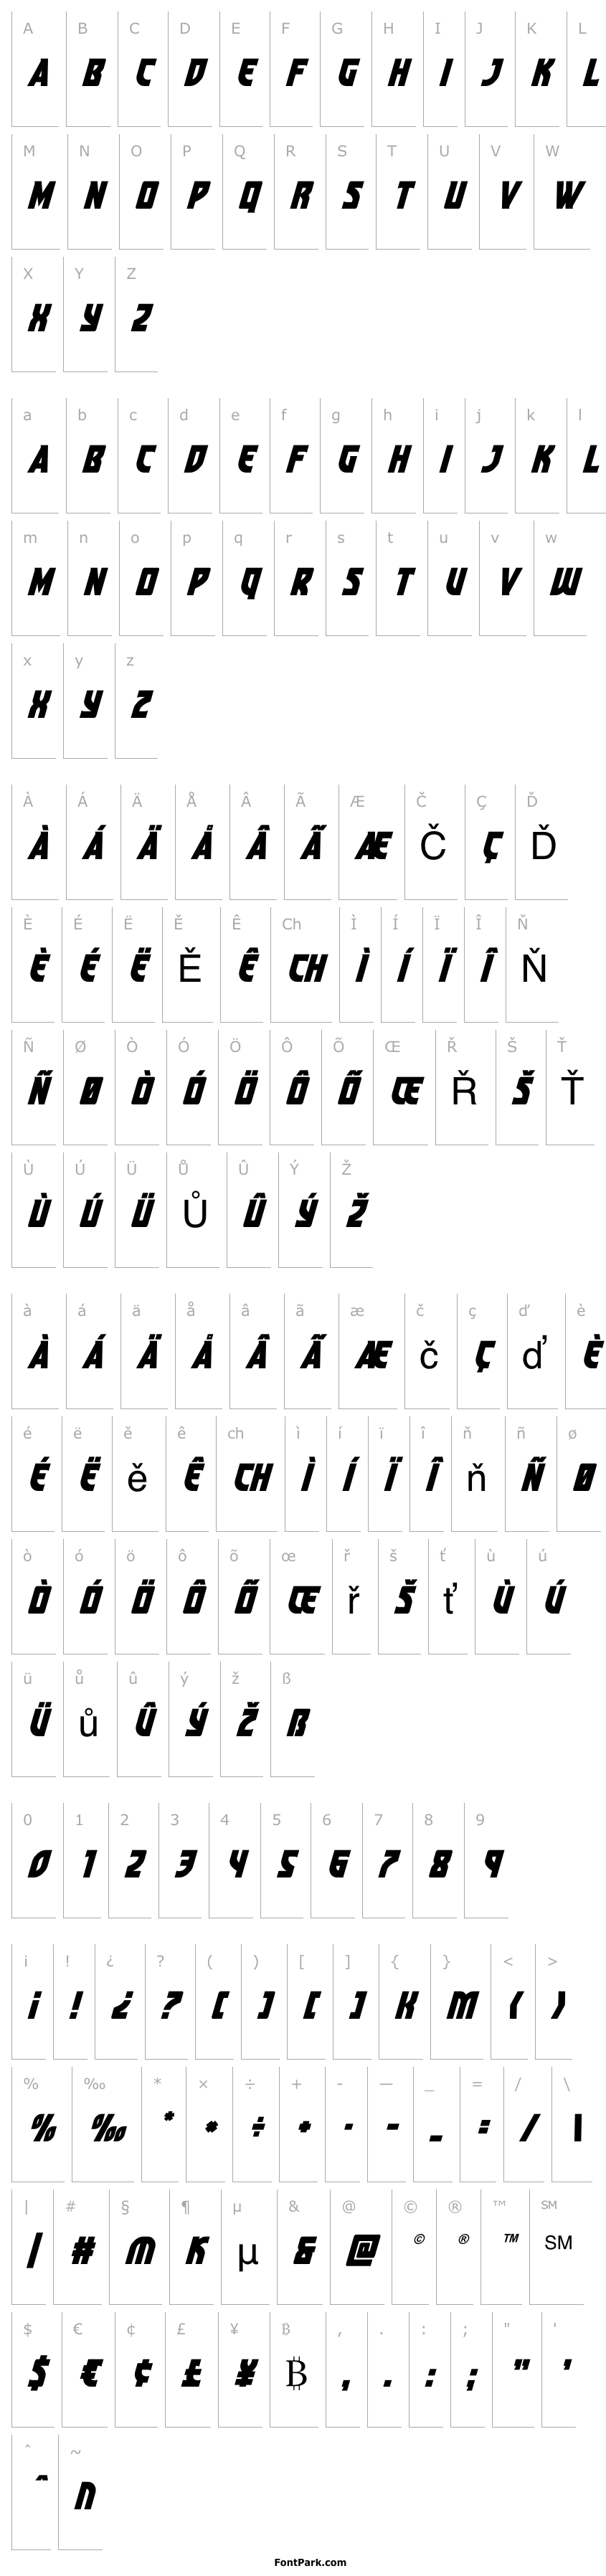 Overview Kung-Fu Master Super-Italic